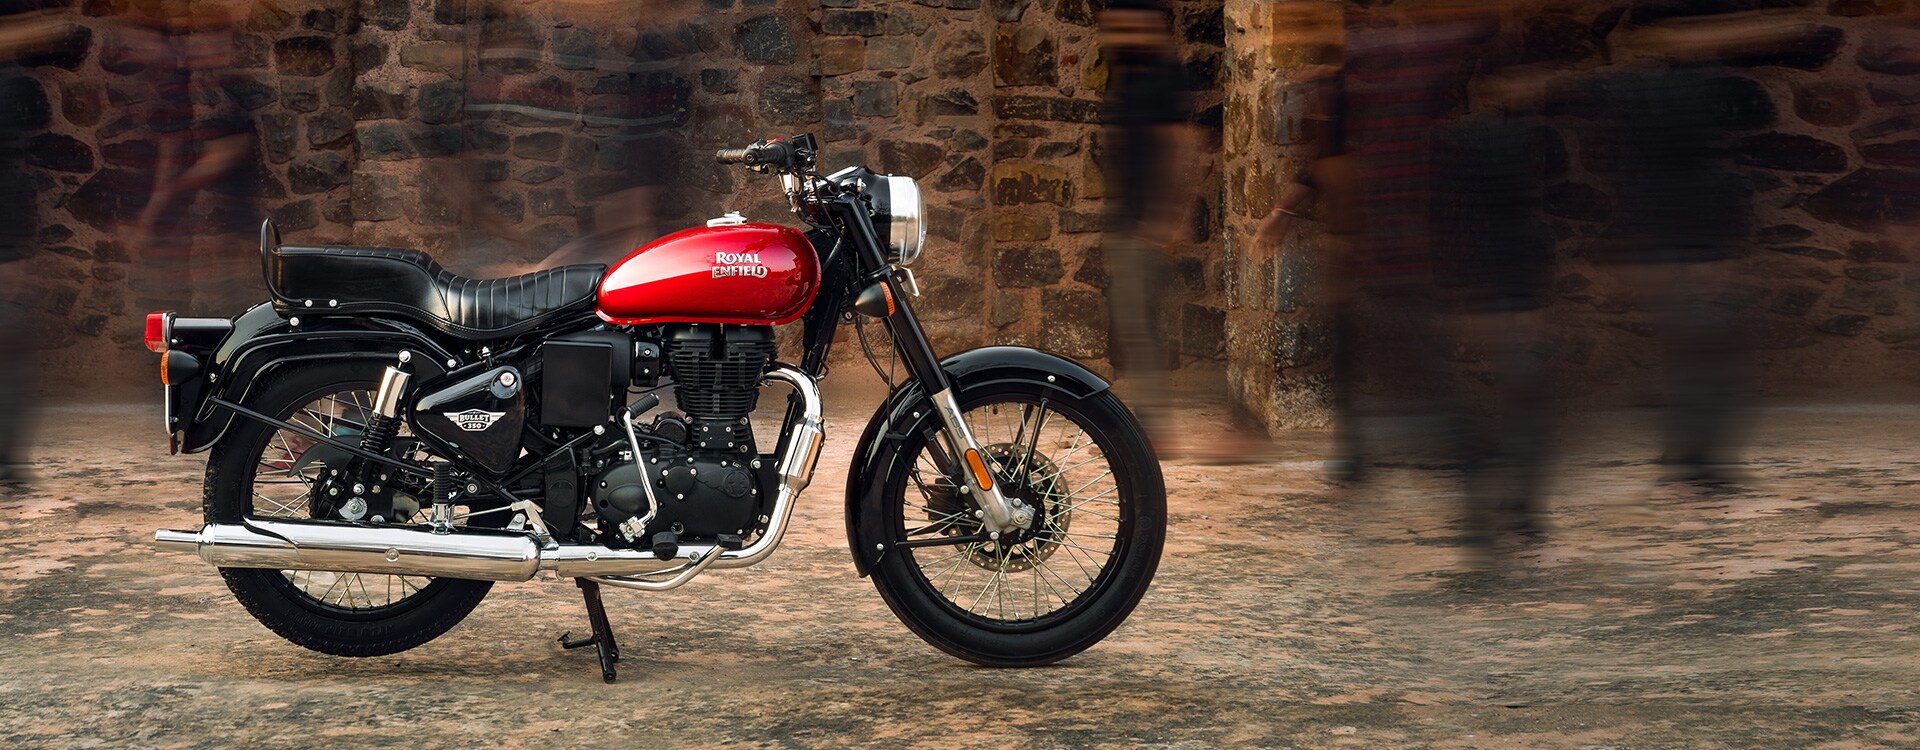 RE Bullet 350 ES Price Colours Images  Mileage in India  Royal Enfield